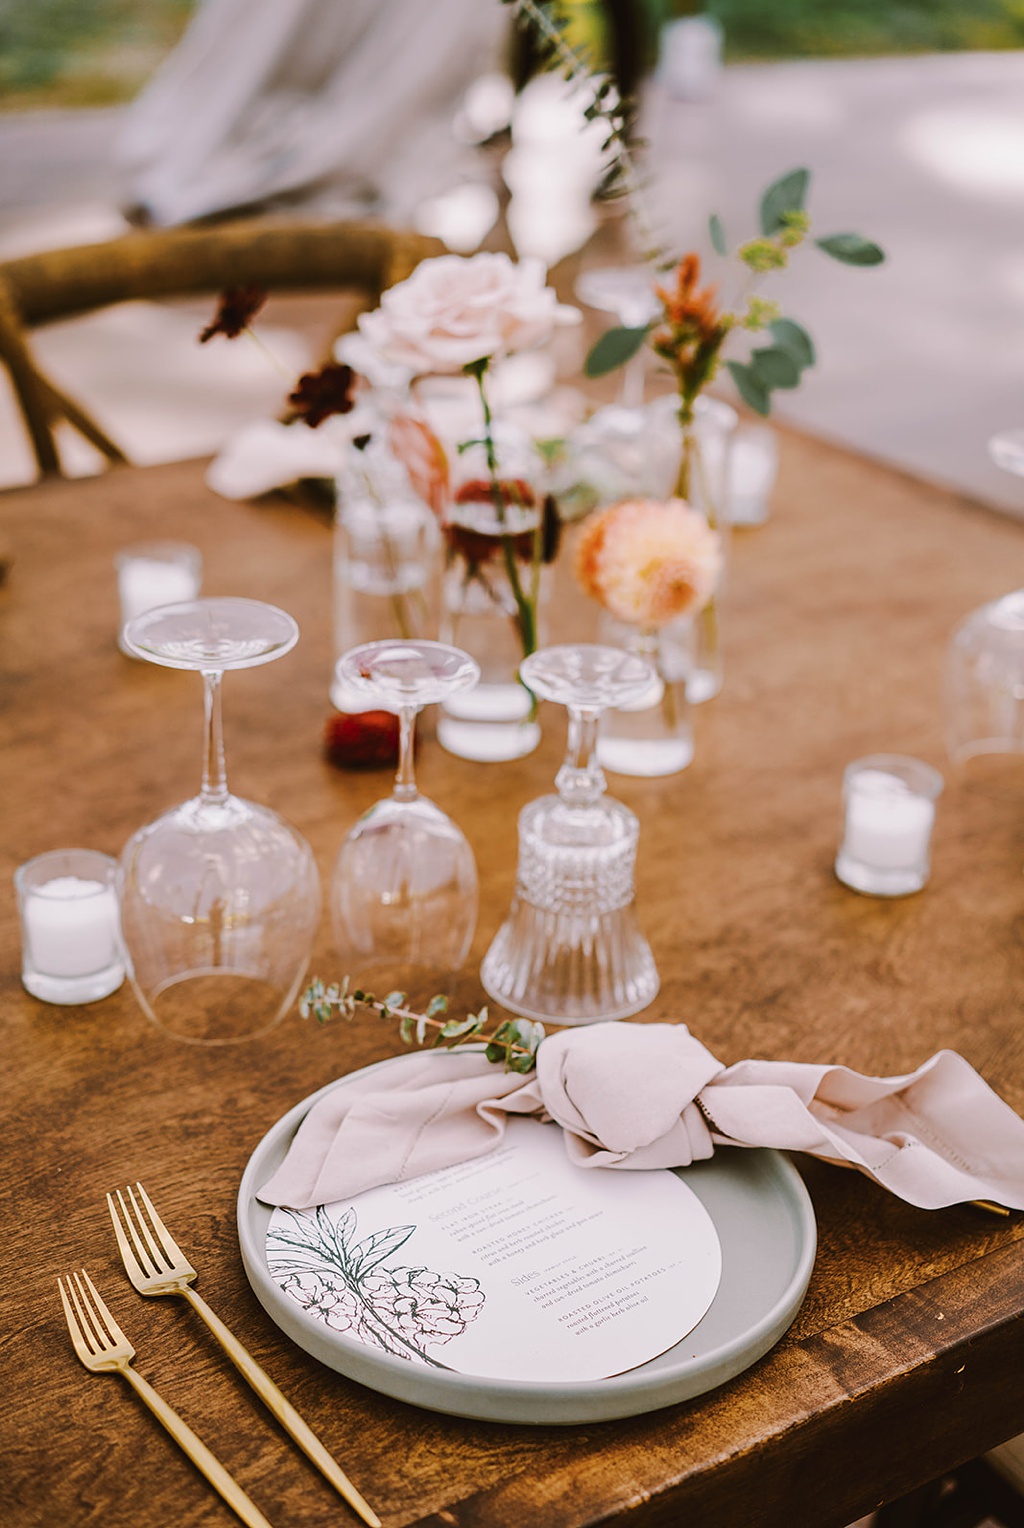 Reception place settings for a summer wedding with pink napkins, menus, and botanical sprigs